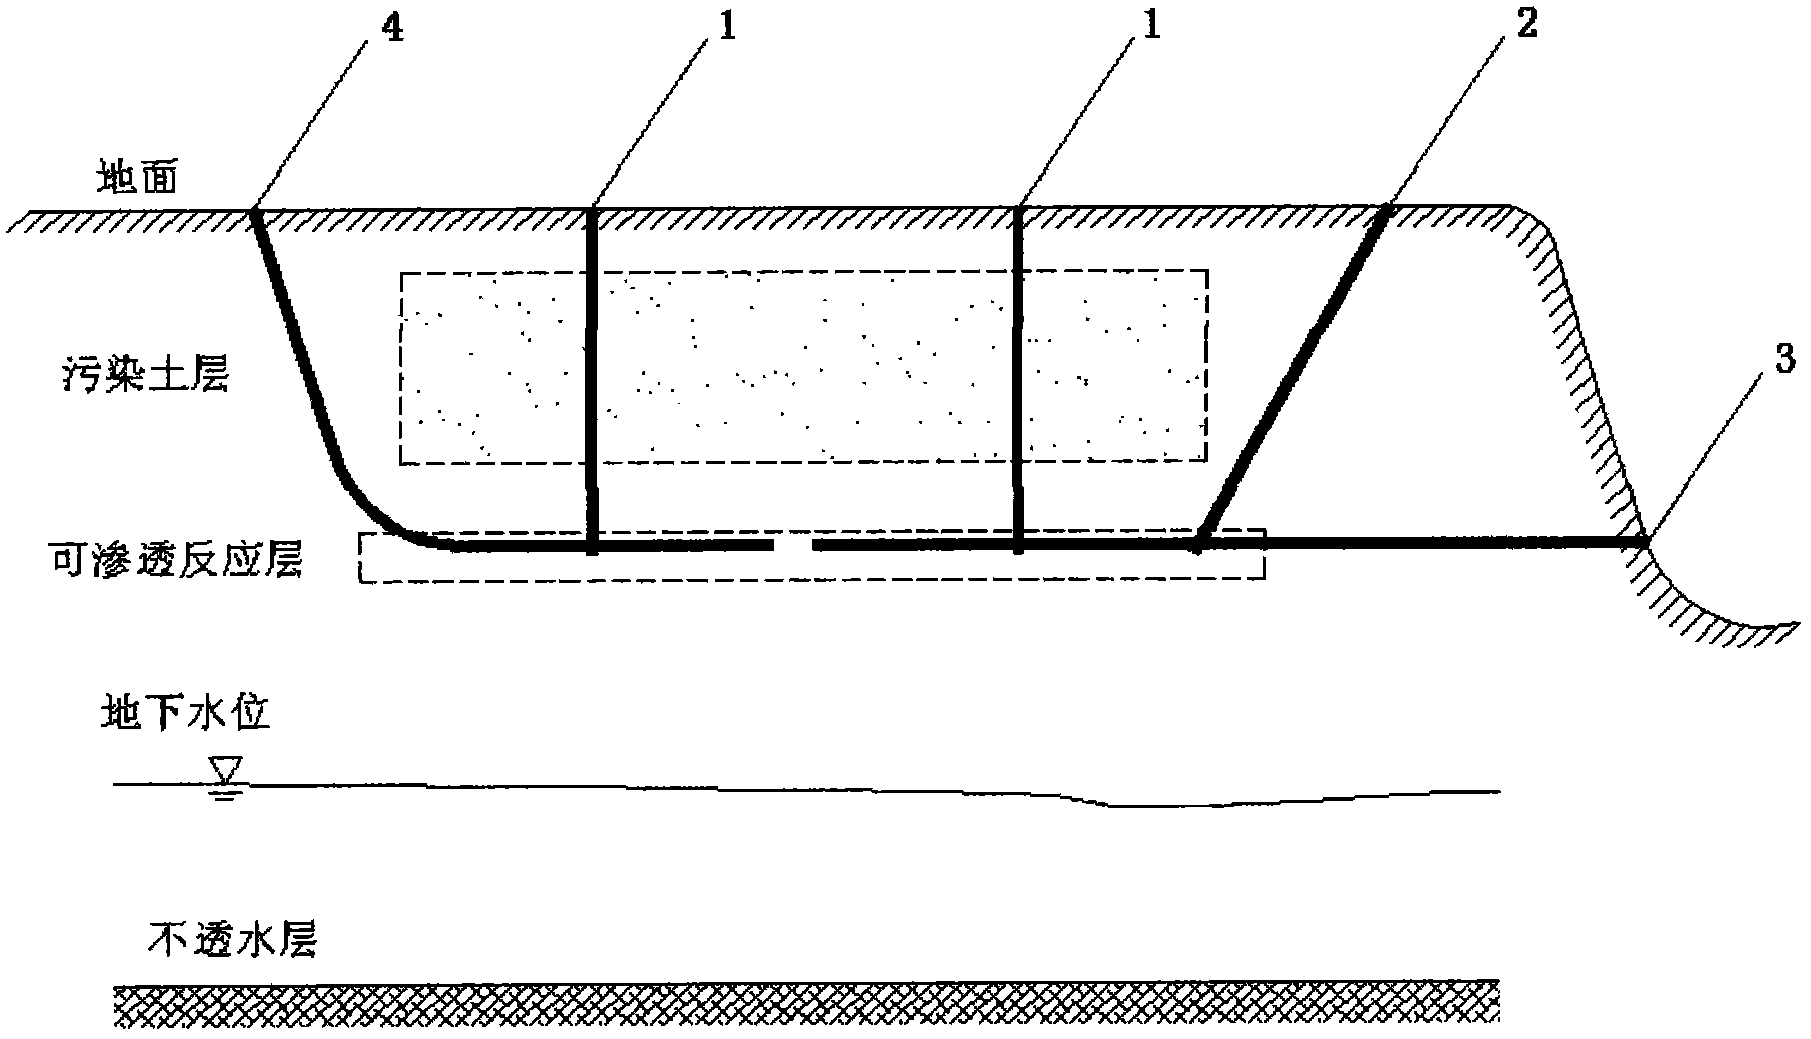 Horizontal permeable reaction layer for soil remediation and soil remediating method